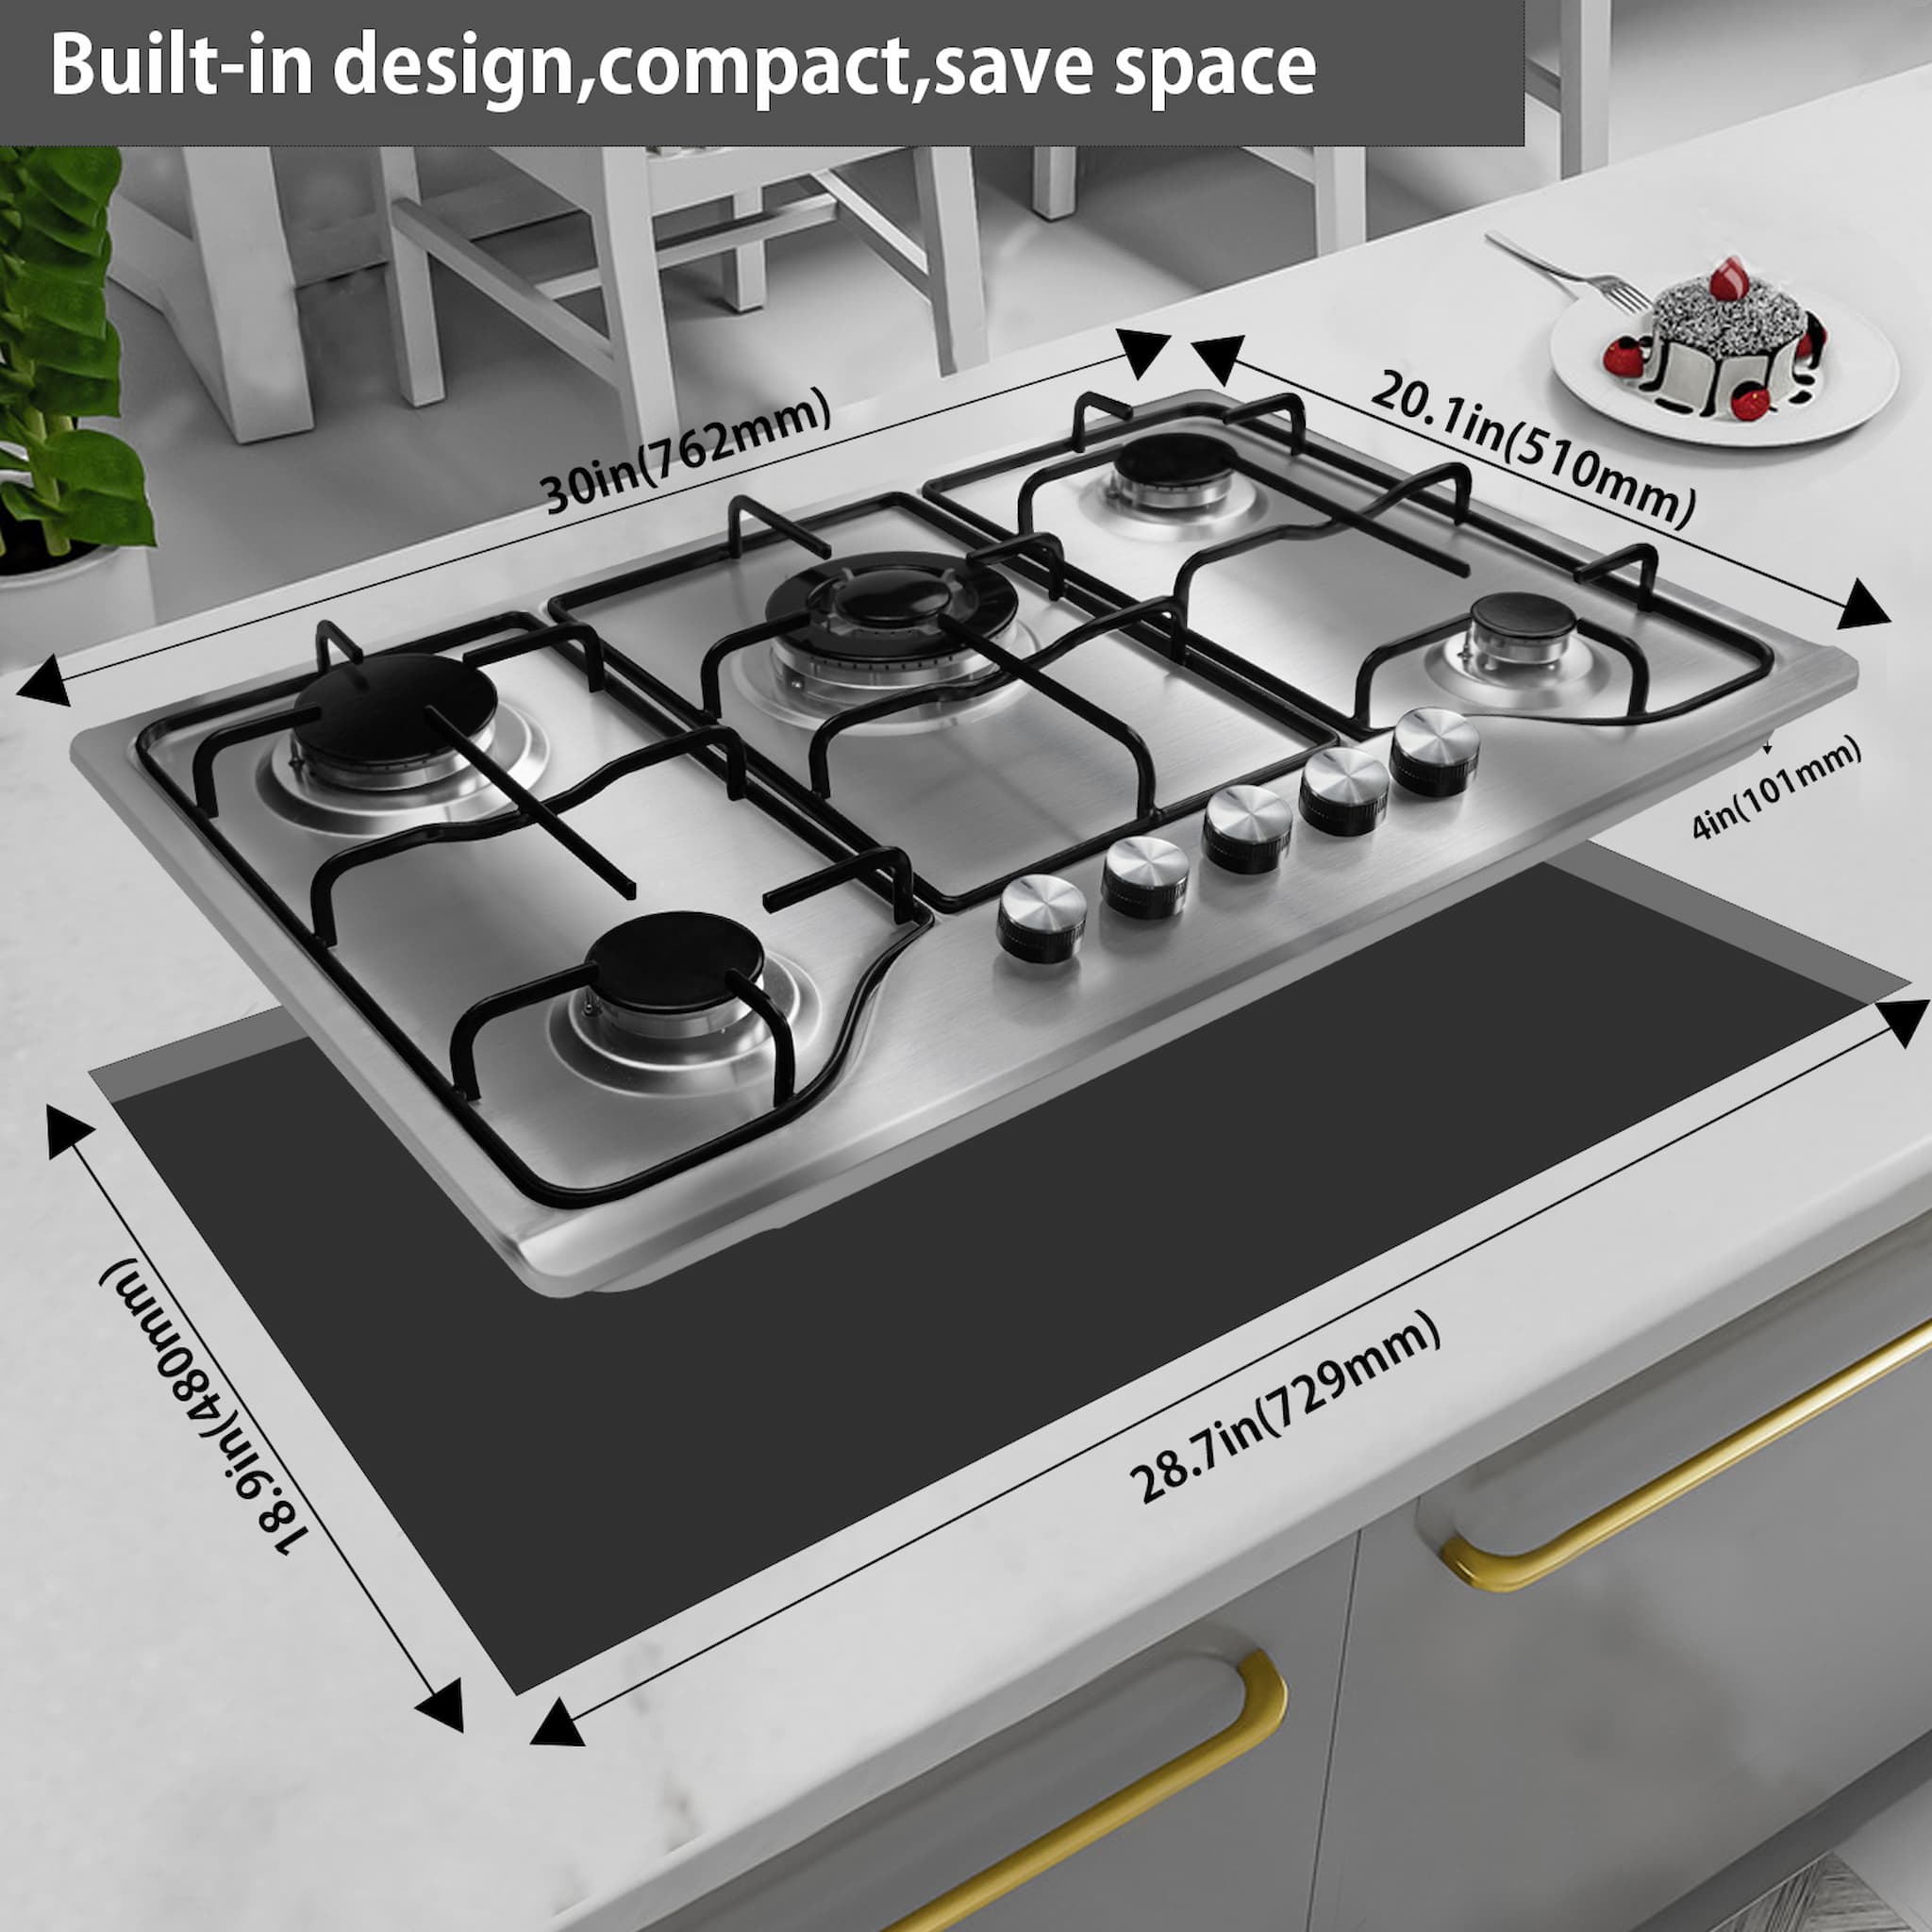 This 30'' propane cooktop is built-in design, compact shape, saving more space.Made of smooth stainless steel, the 30'' gas cooktop is sturdy and durable with a stylish look.